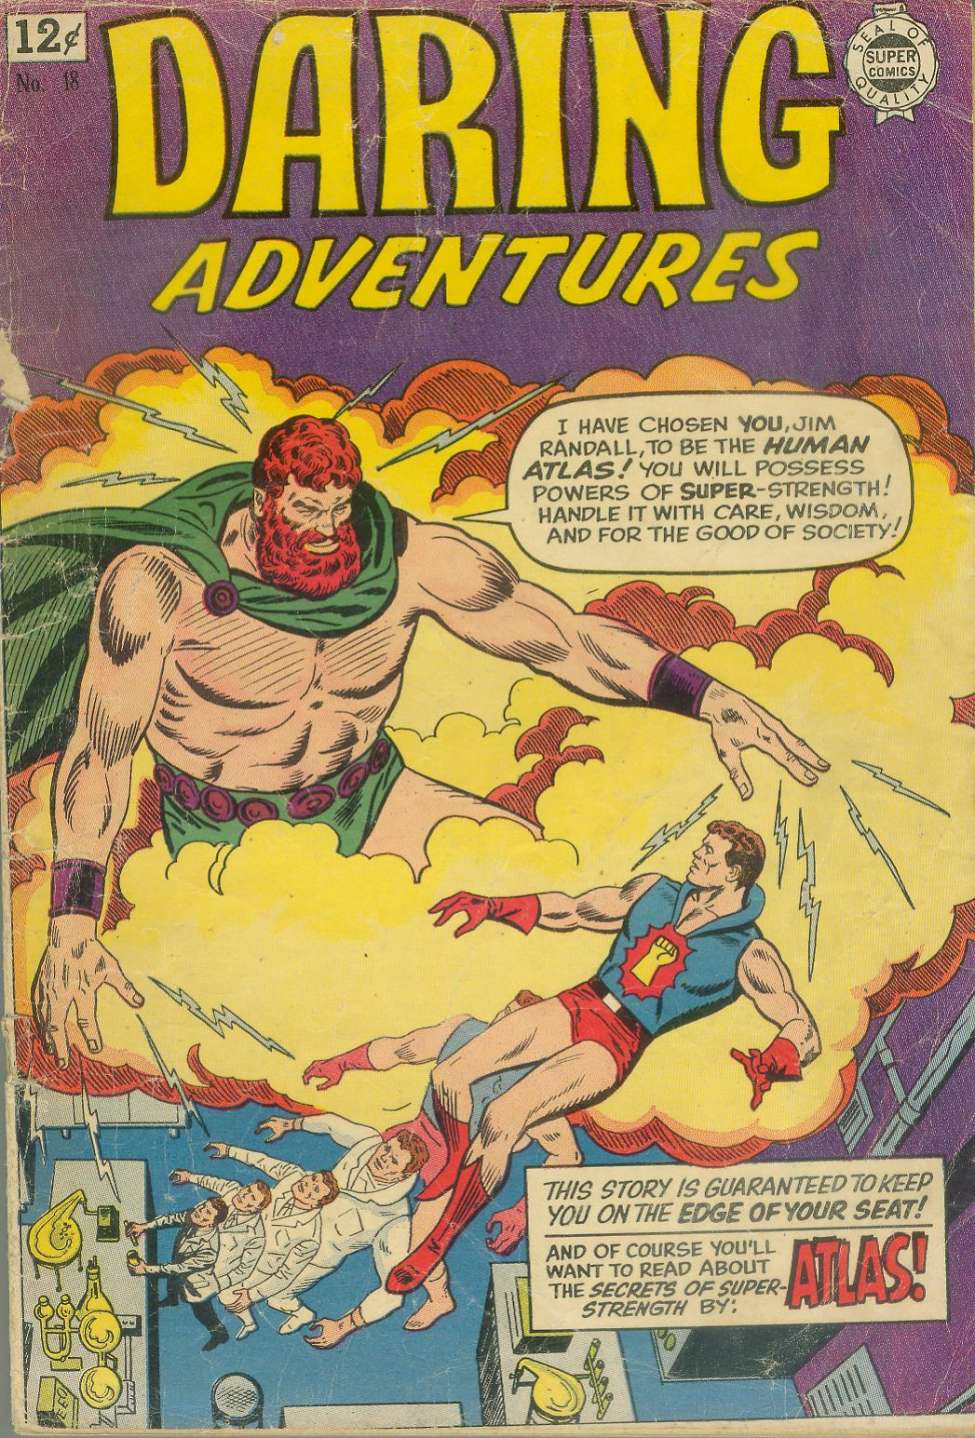 Book Cover For Daring Adventures 18 - Version 1